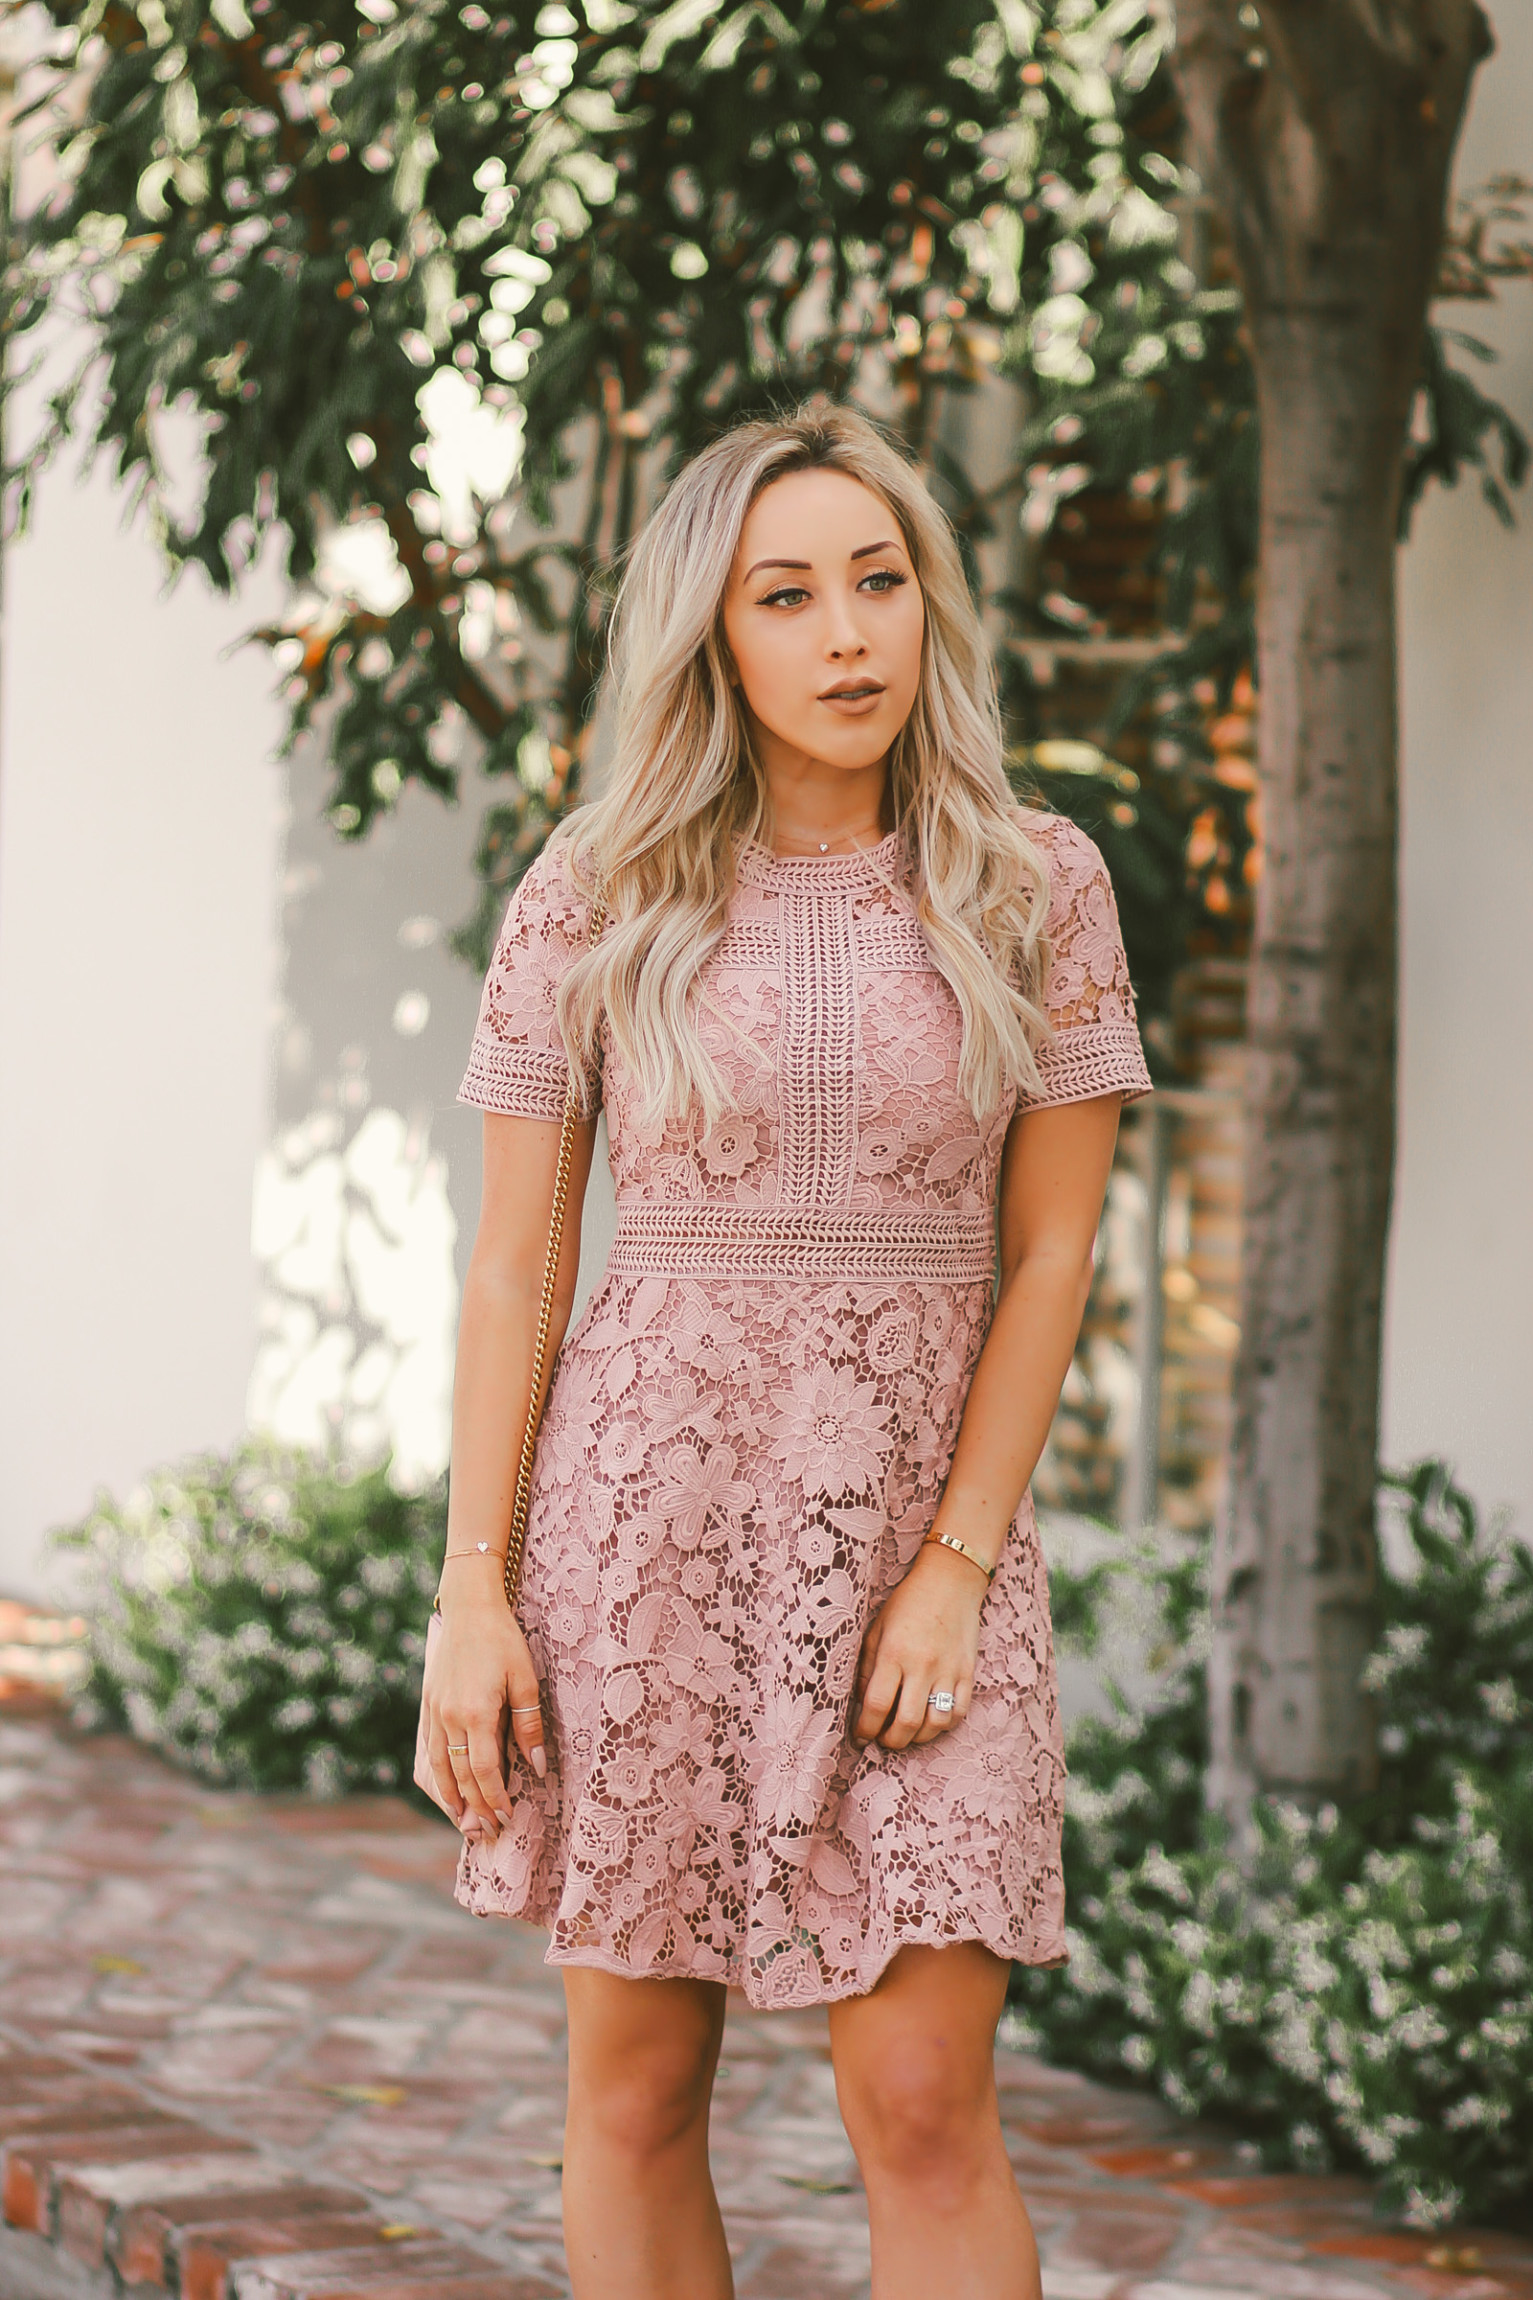 Mother's Day Outfit Inspo | Spring Outfit Inspo | Spring Fashion | Pink Crochet Dress | Blondie in the City by Hayley Larue